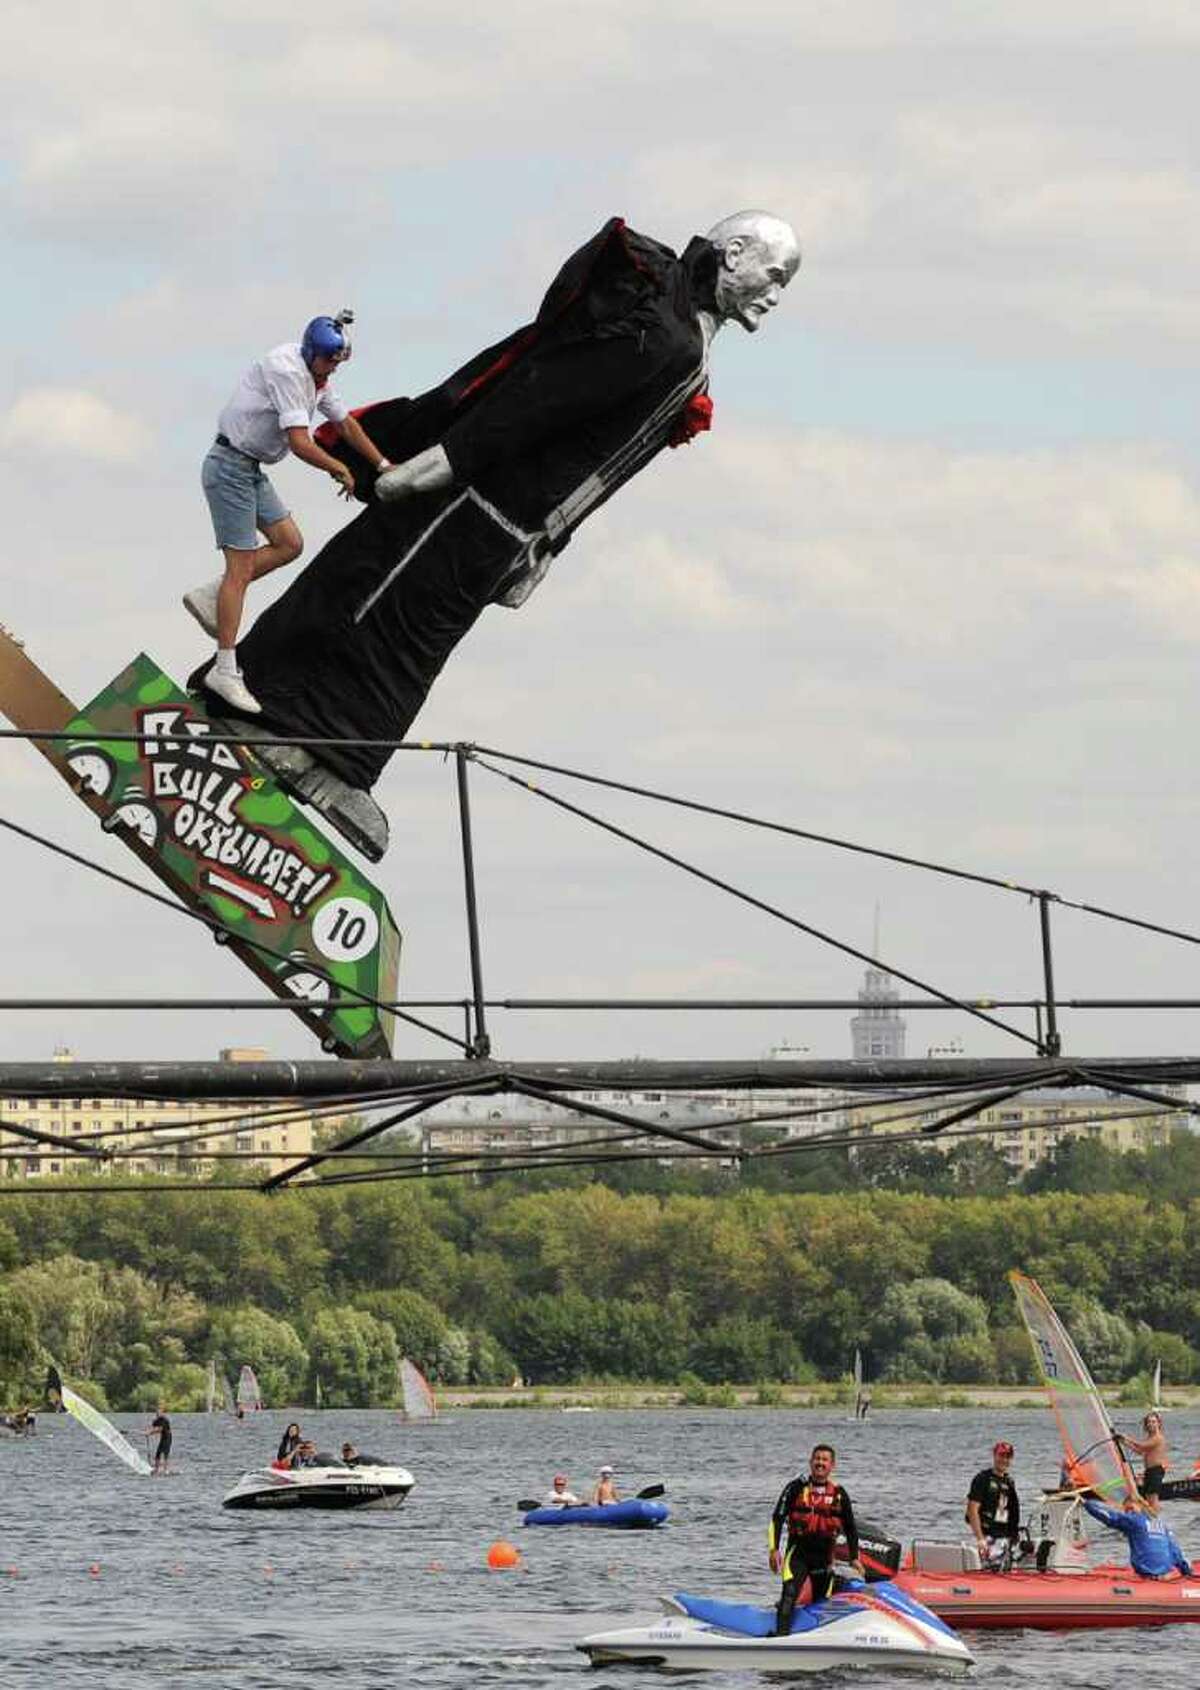 Moscow just hosted the latest Red Bull "Flugtag" ("flying day," in German) competition, in which teams send human-powered flying machines off a 30-foot-high deck. Teams get points for distance and style, although most seem to concentrate on the latter. Here, the "Ilich Square" team (Ilich was Lenin's middle name) competes in Moscow on August 7, 2011.